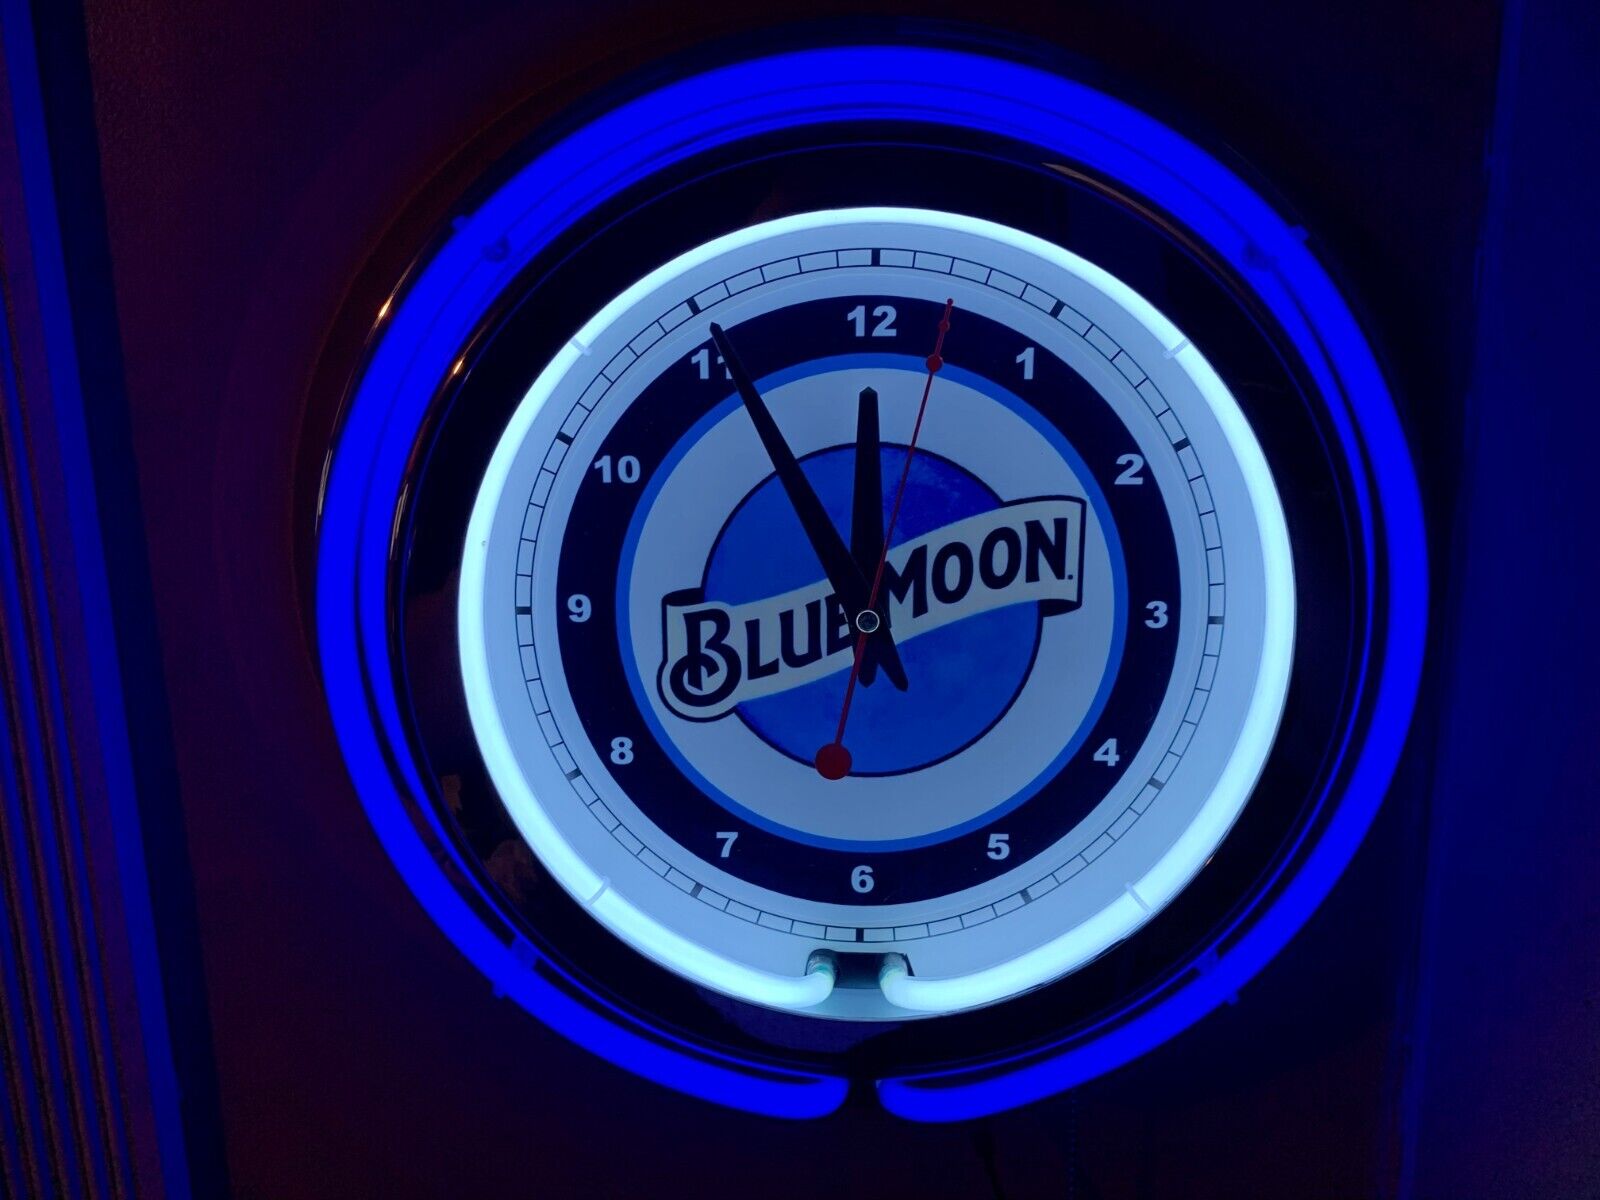 Blue Moon Beer Man Cave BLUE Neon Wall Clock Advertising Sign